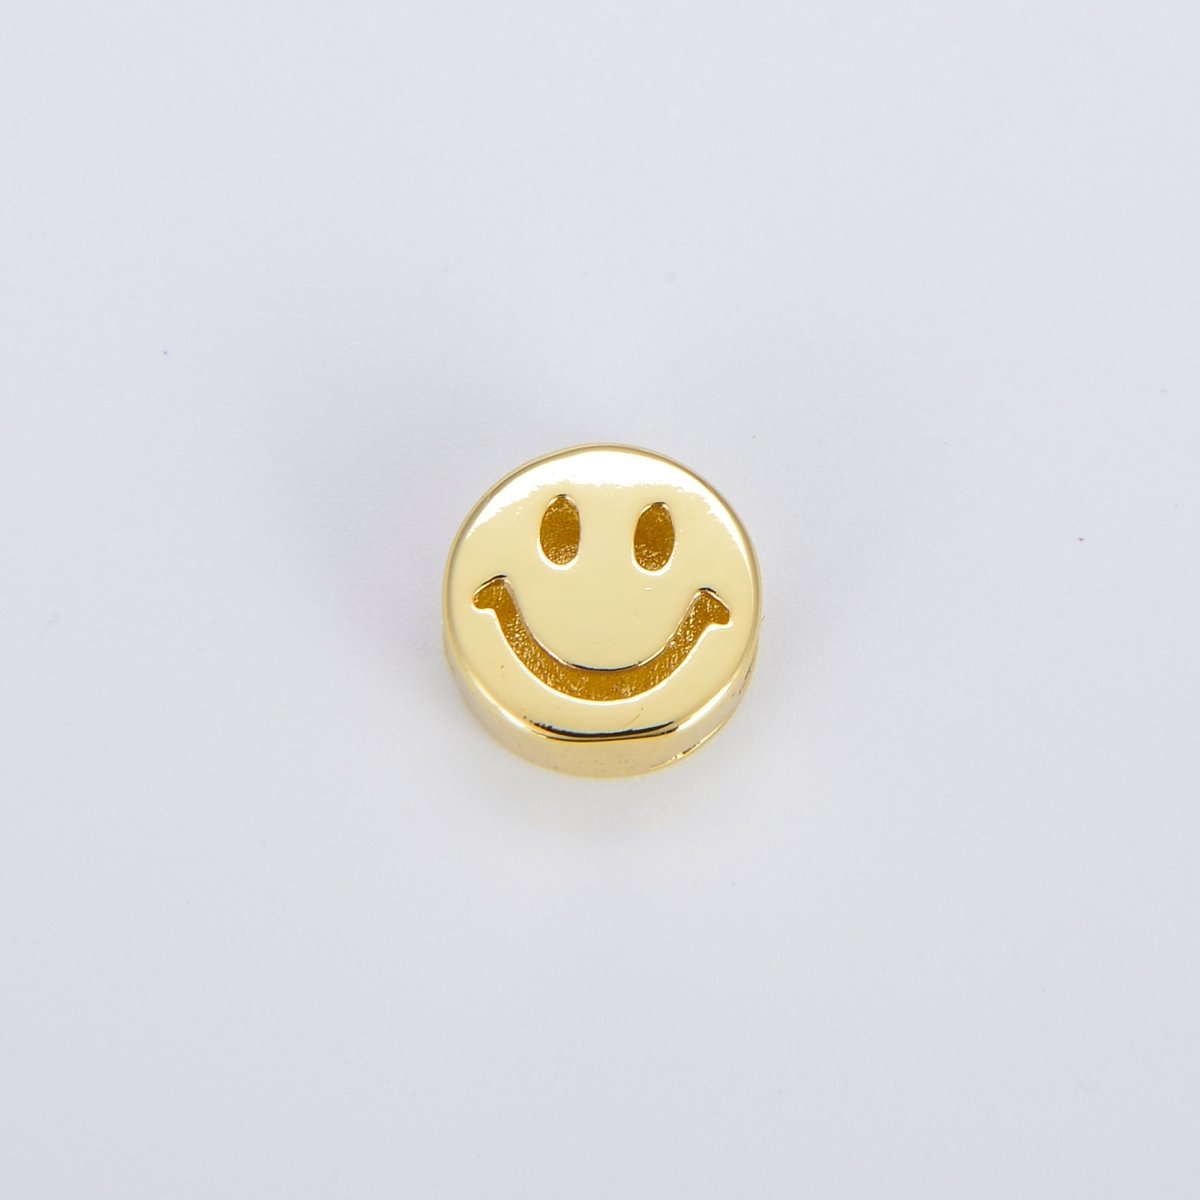 11.5mm Smiley Face Beads, Emoji Beads, Happy Face, Gold Cute Spacer Beads, Necklace And Bracelet Making, Jewelry Supplies B-484 - DLUXCA